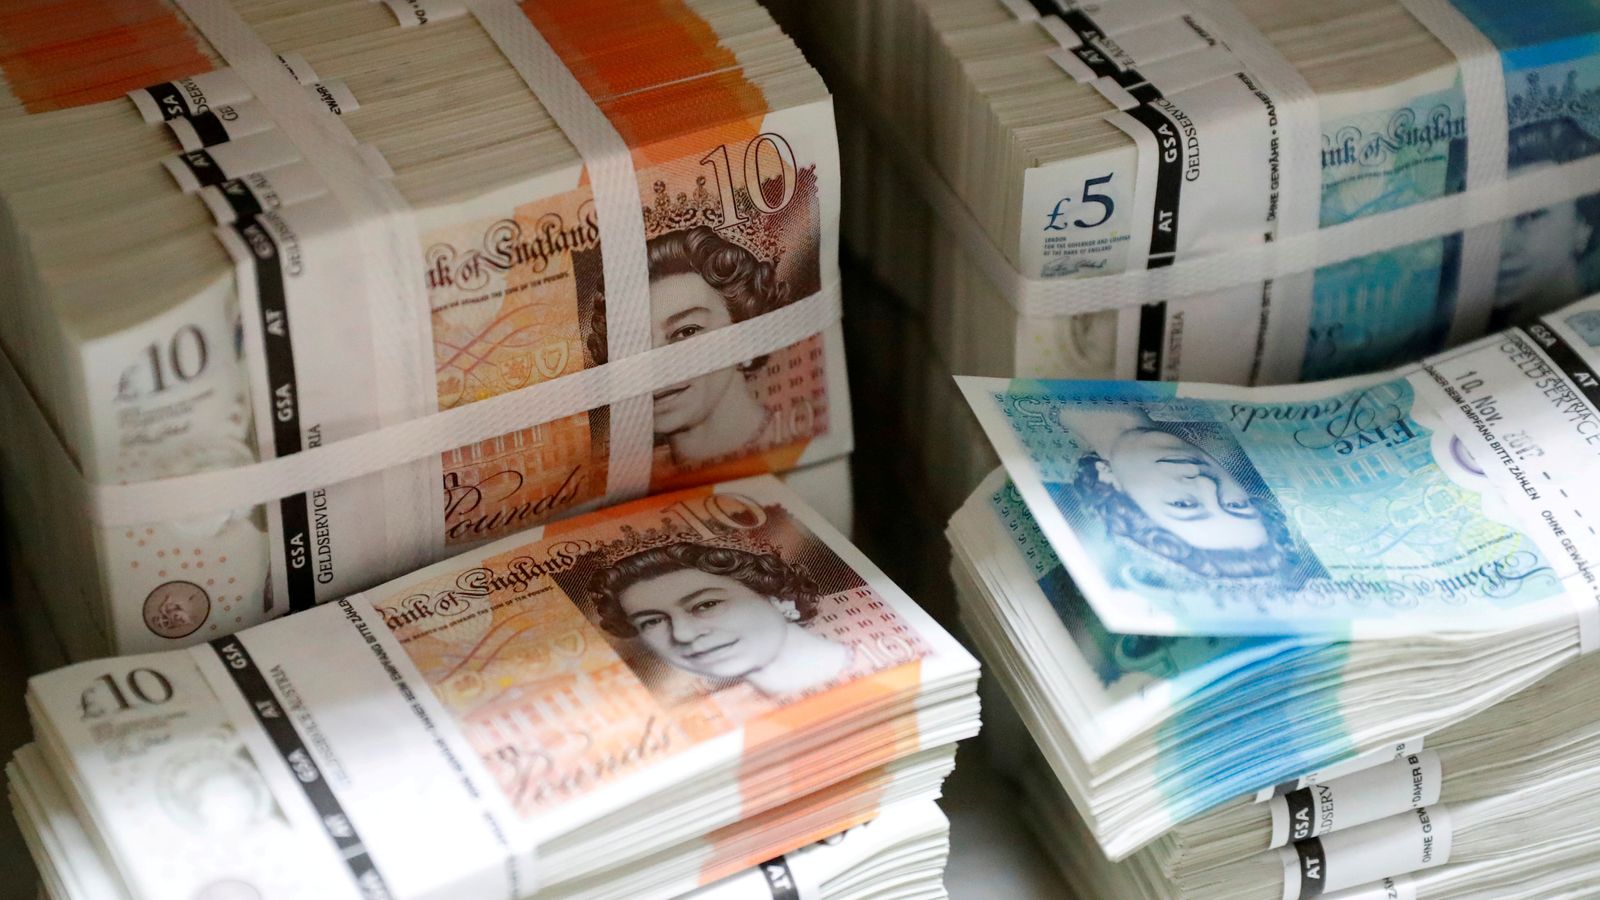 Lowest demand for cash since central banks hoarded notes over millennium bug fears